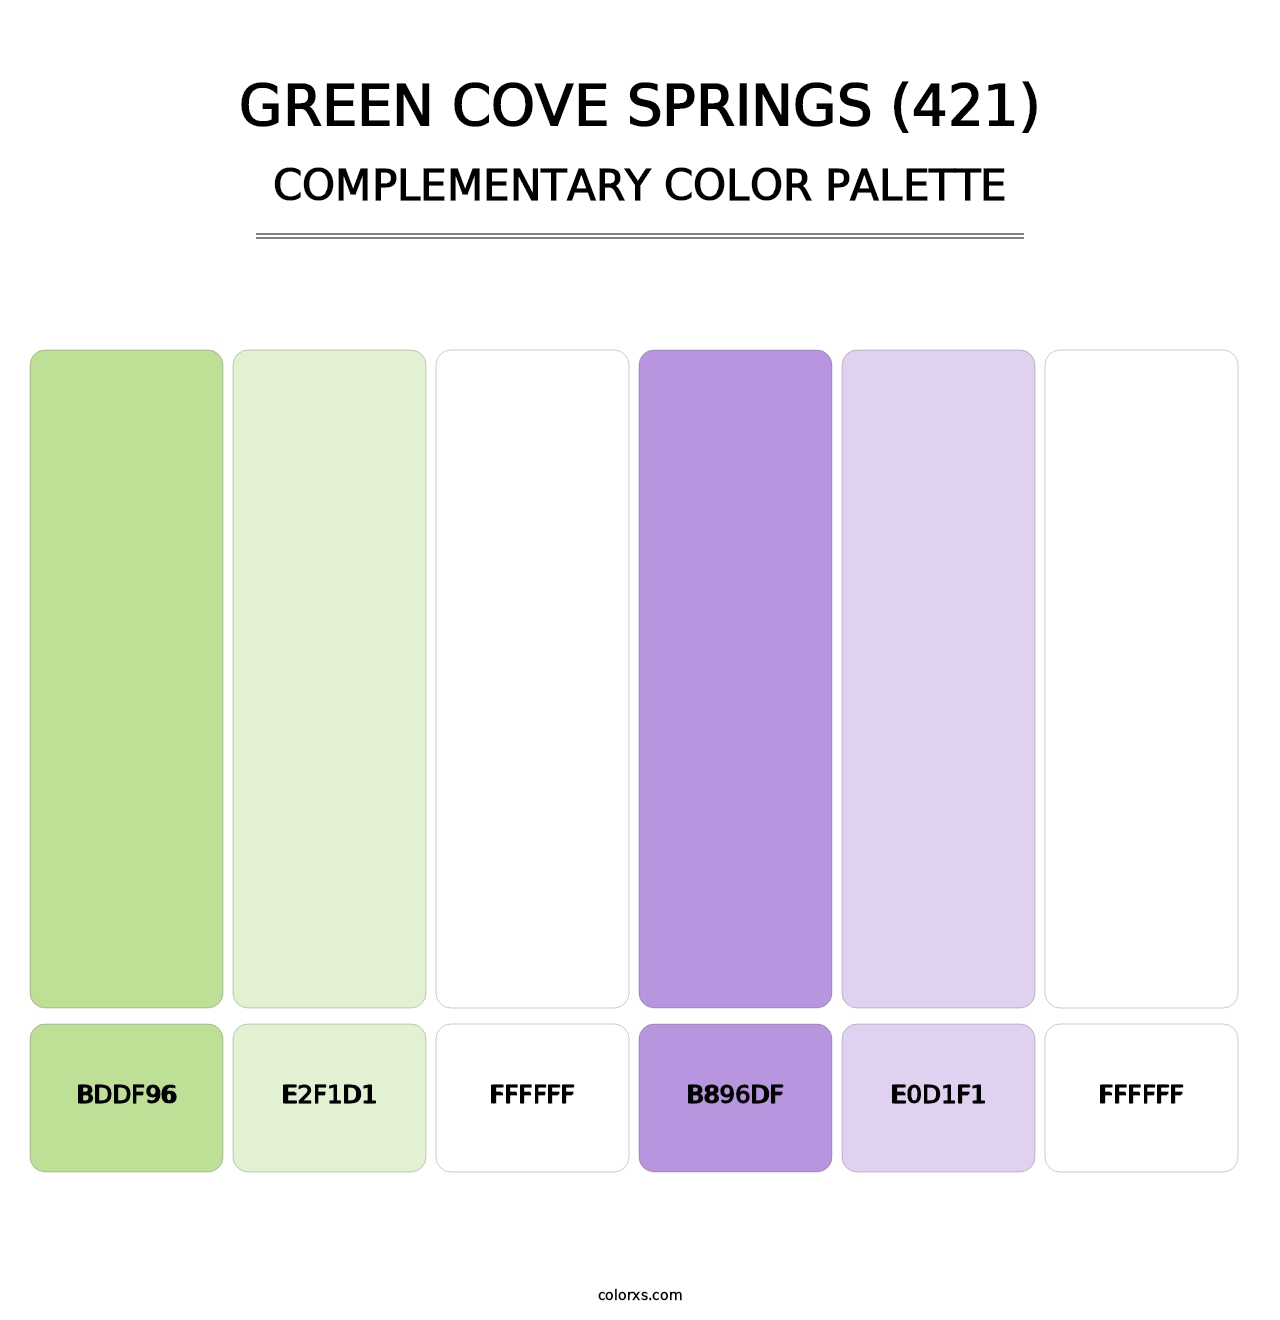 Green Cove Springs (421) - Complementary Color Palette